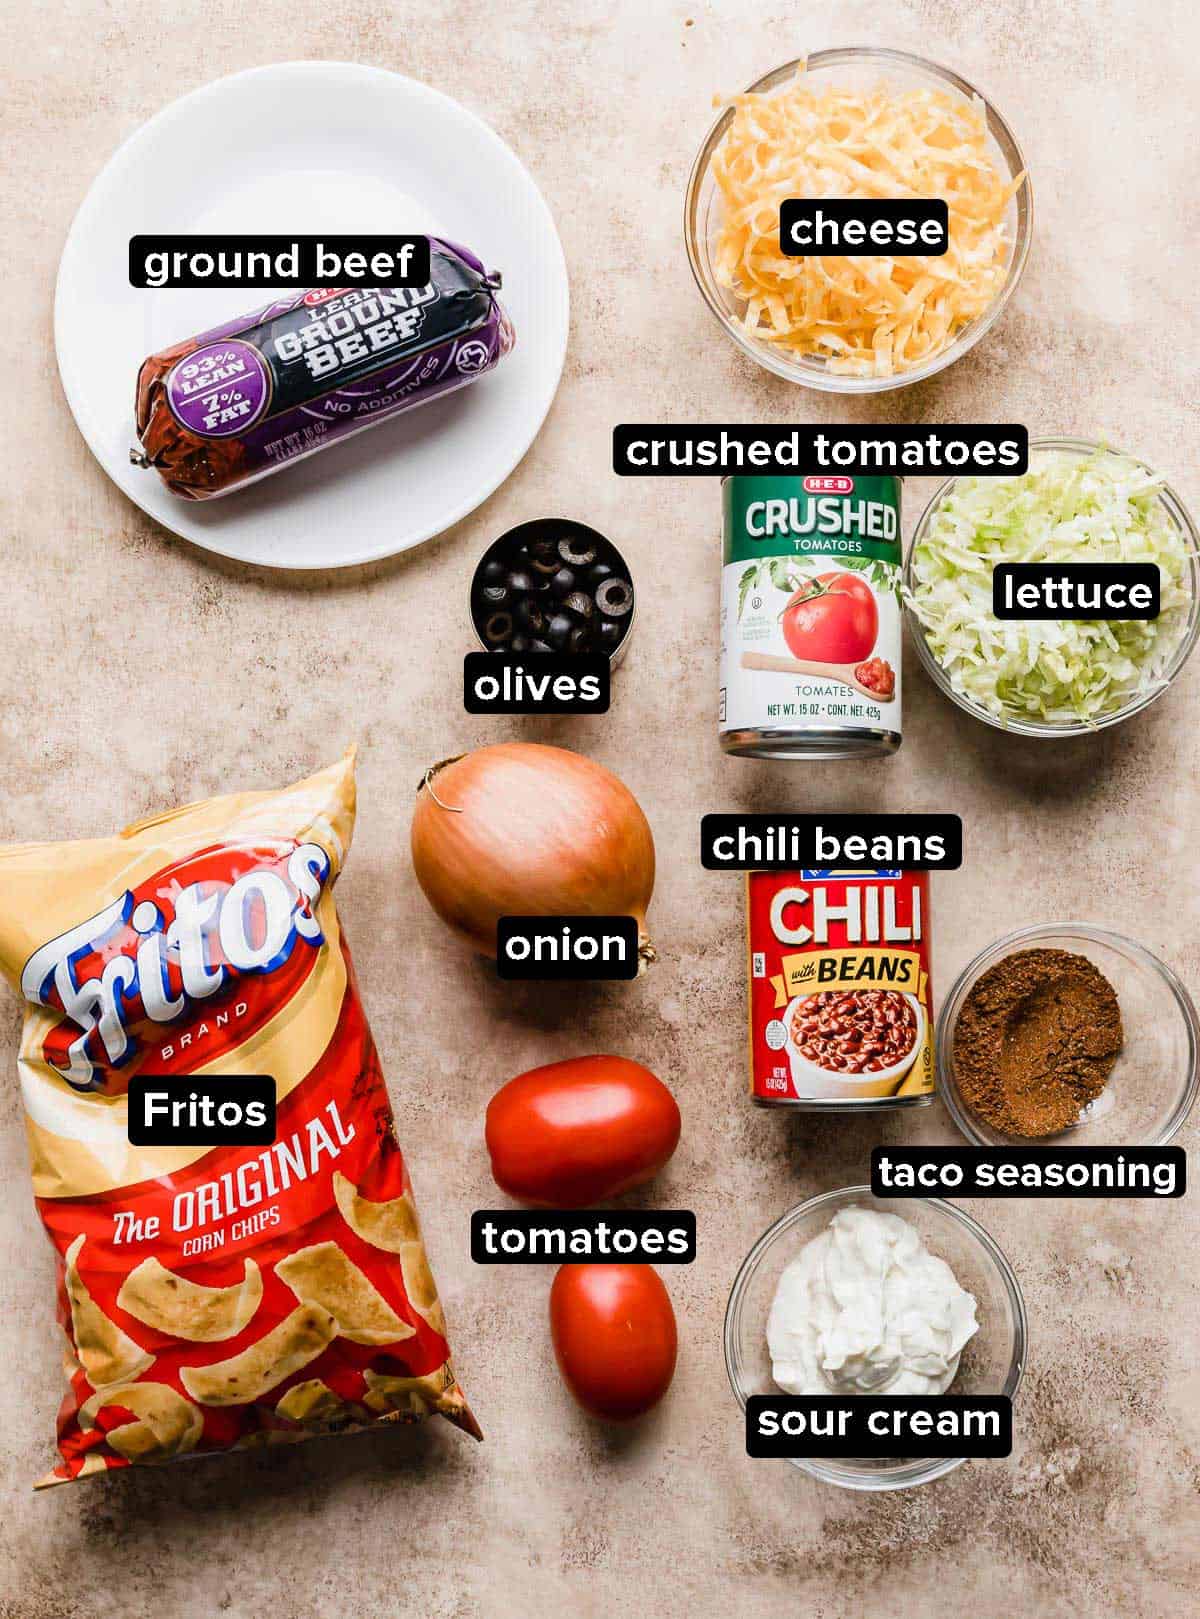 Walking Taco Casserole Recipe ingredients laid out on a beige textured background.